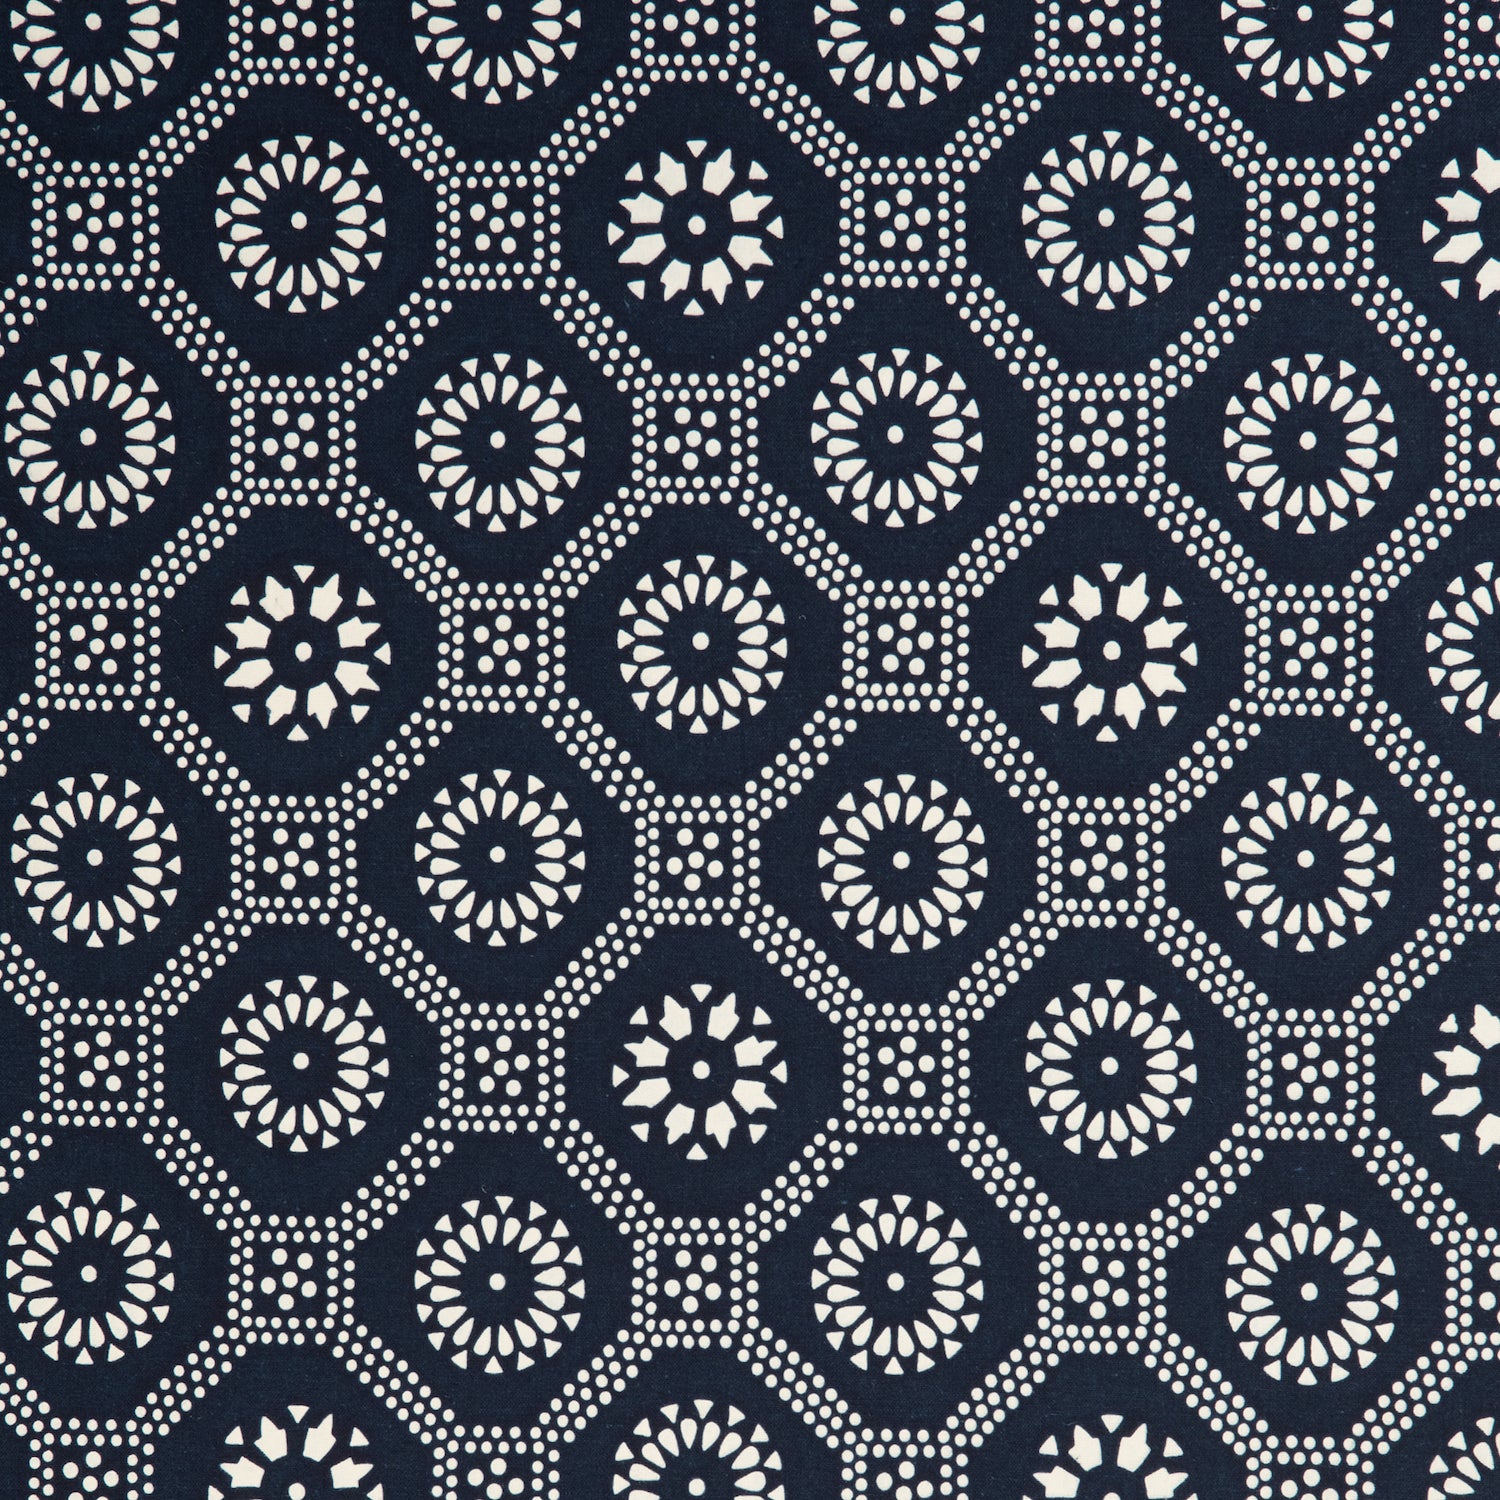 Detail of a cotton fabric in a floral gridded honeycomb pattern in white on an indigo field.